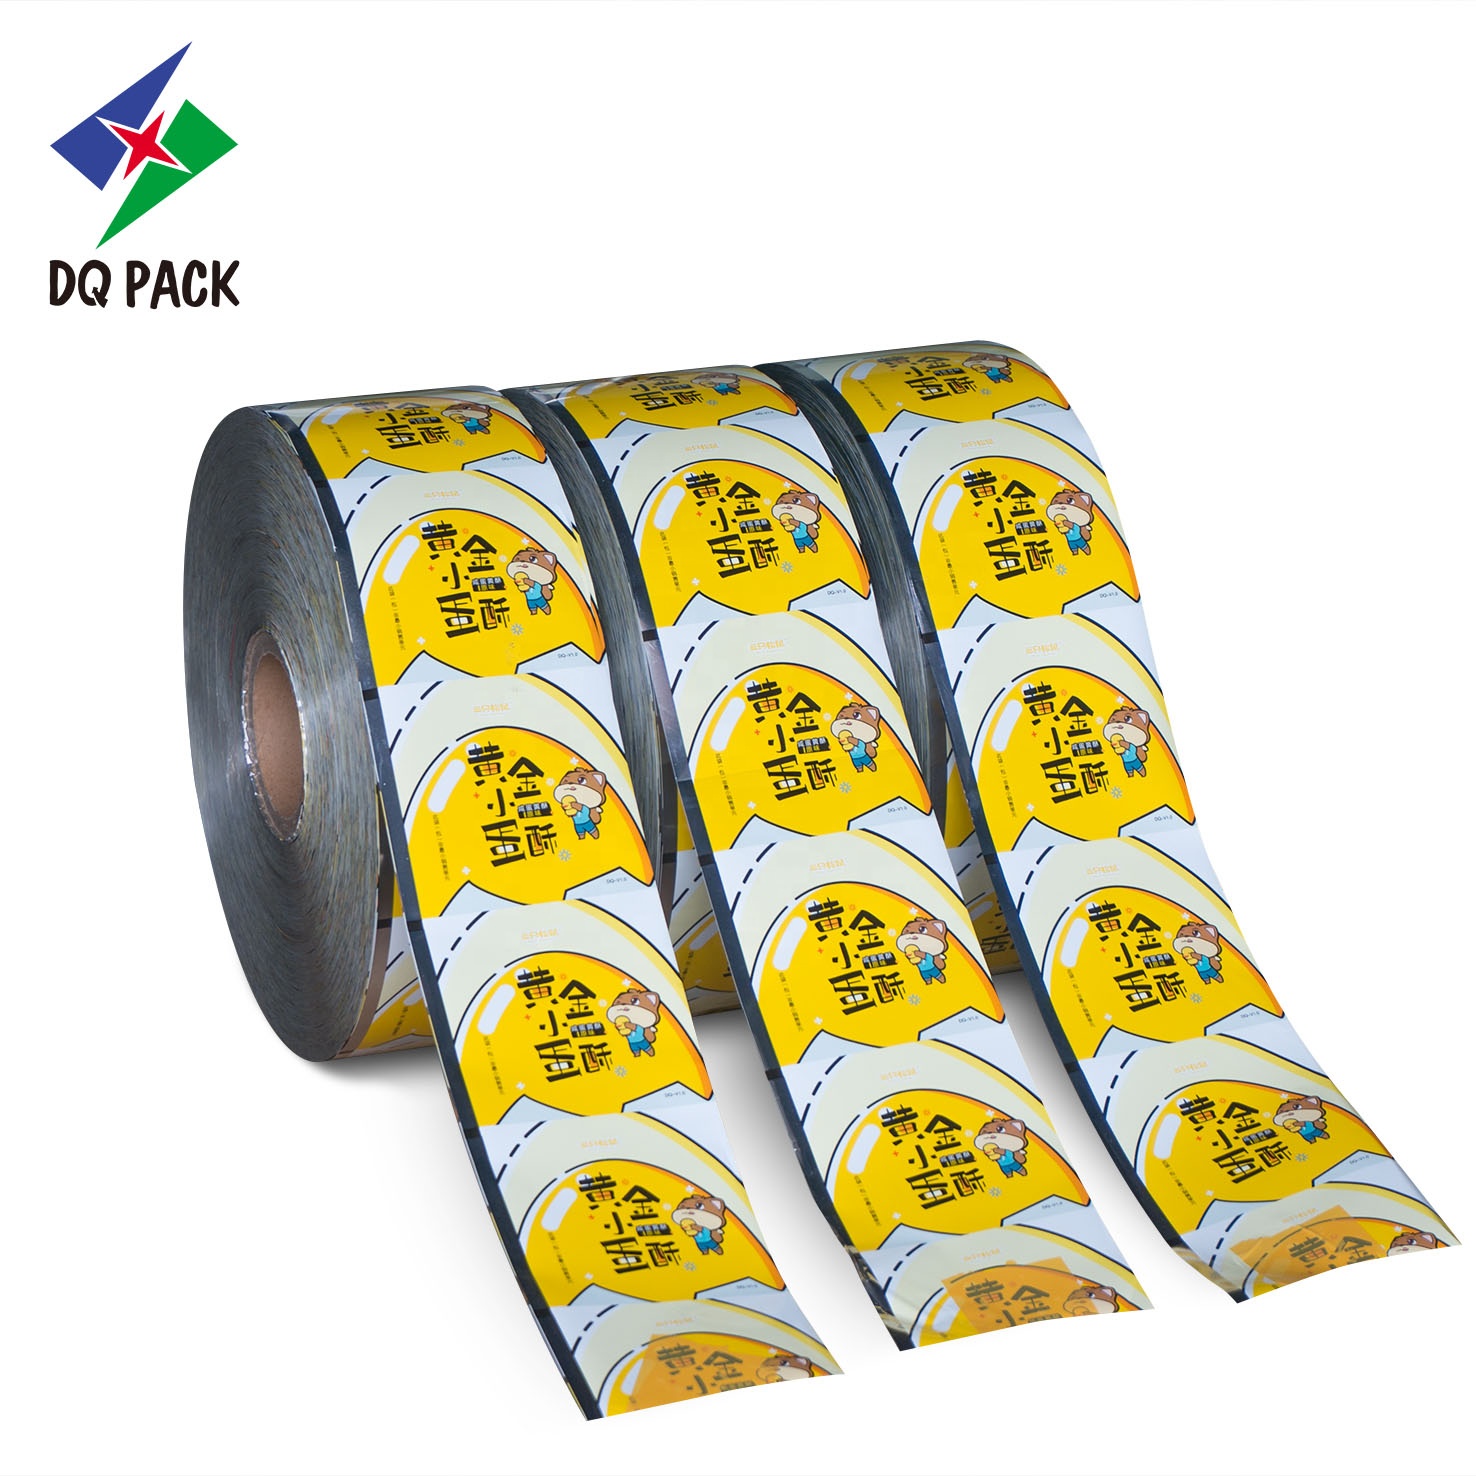 DQ PACK Custom Printed Food Grade Roll Film Cup Sealing Film for PP PS Cup Jelly Juice Butter packaging